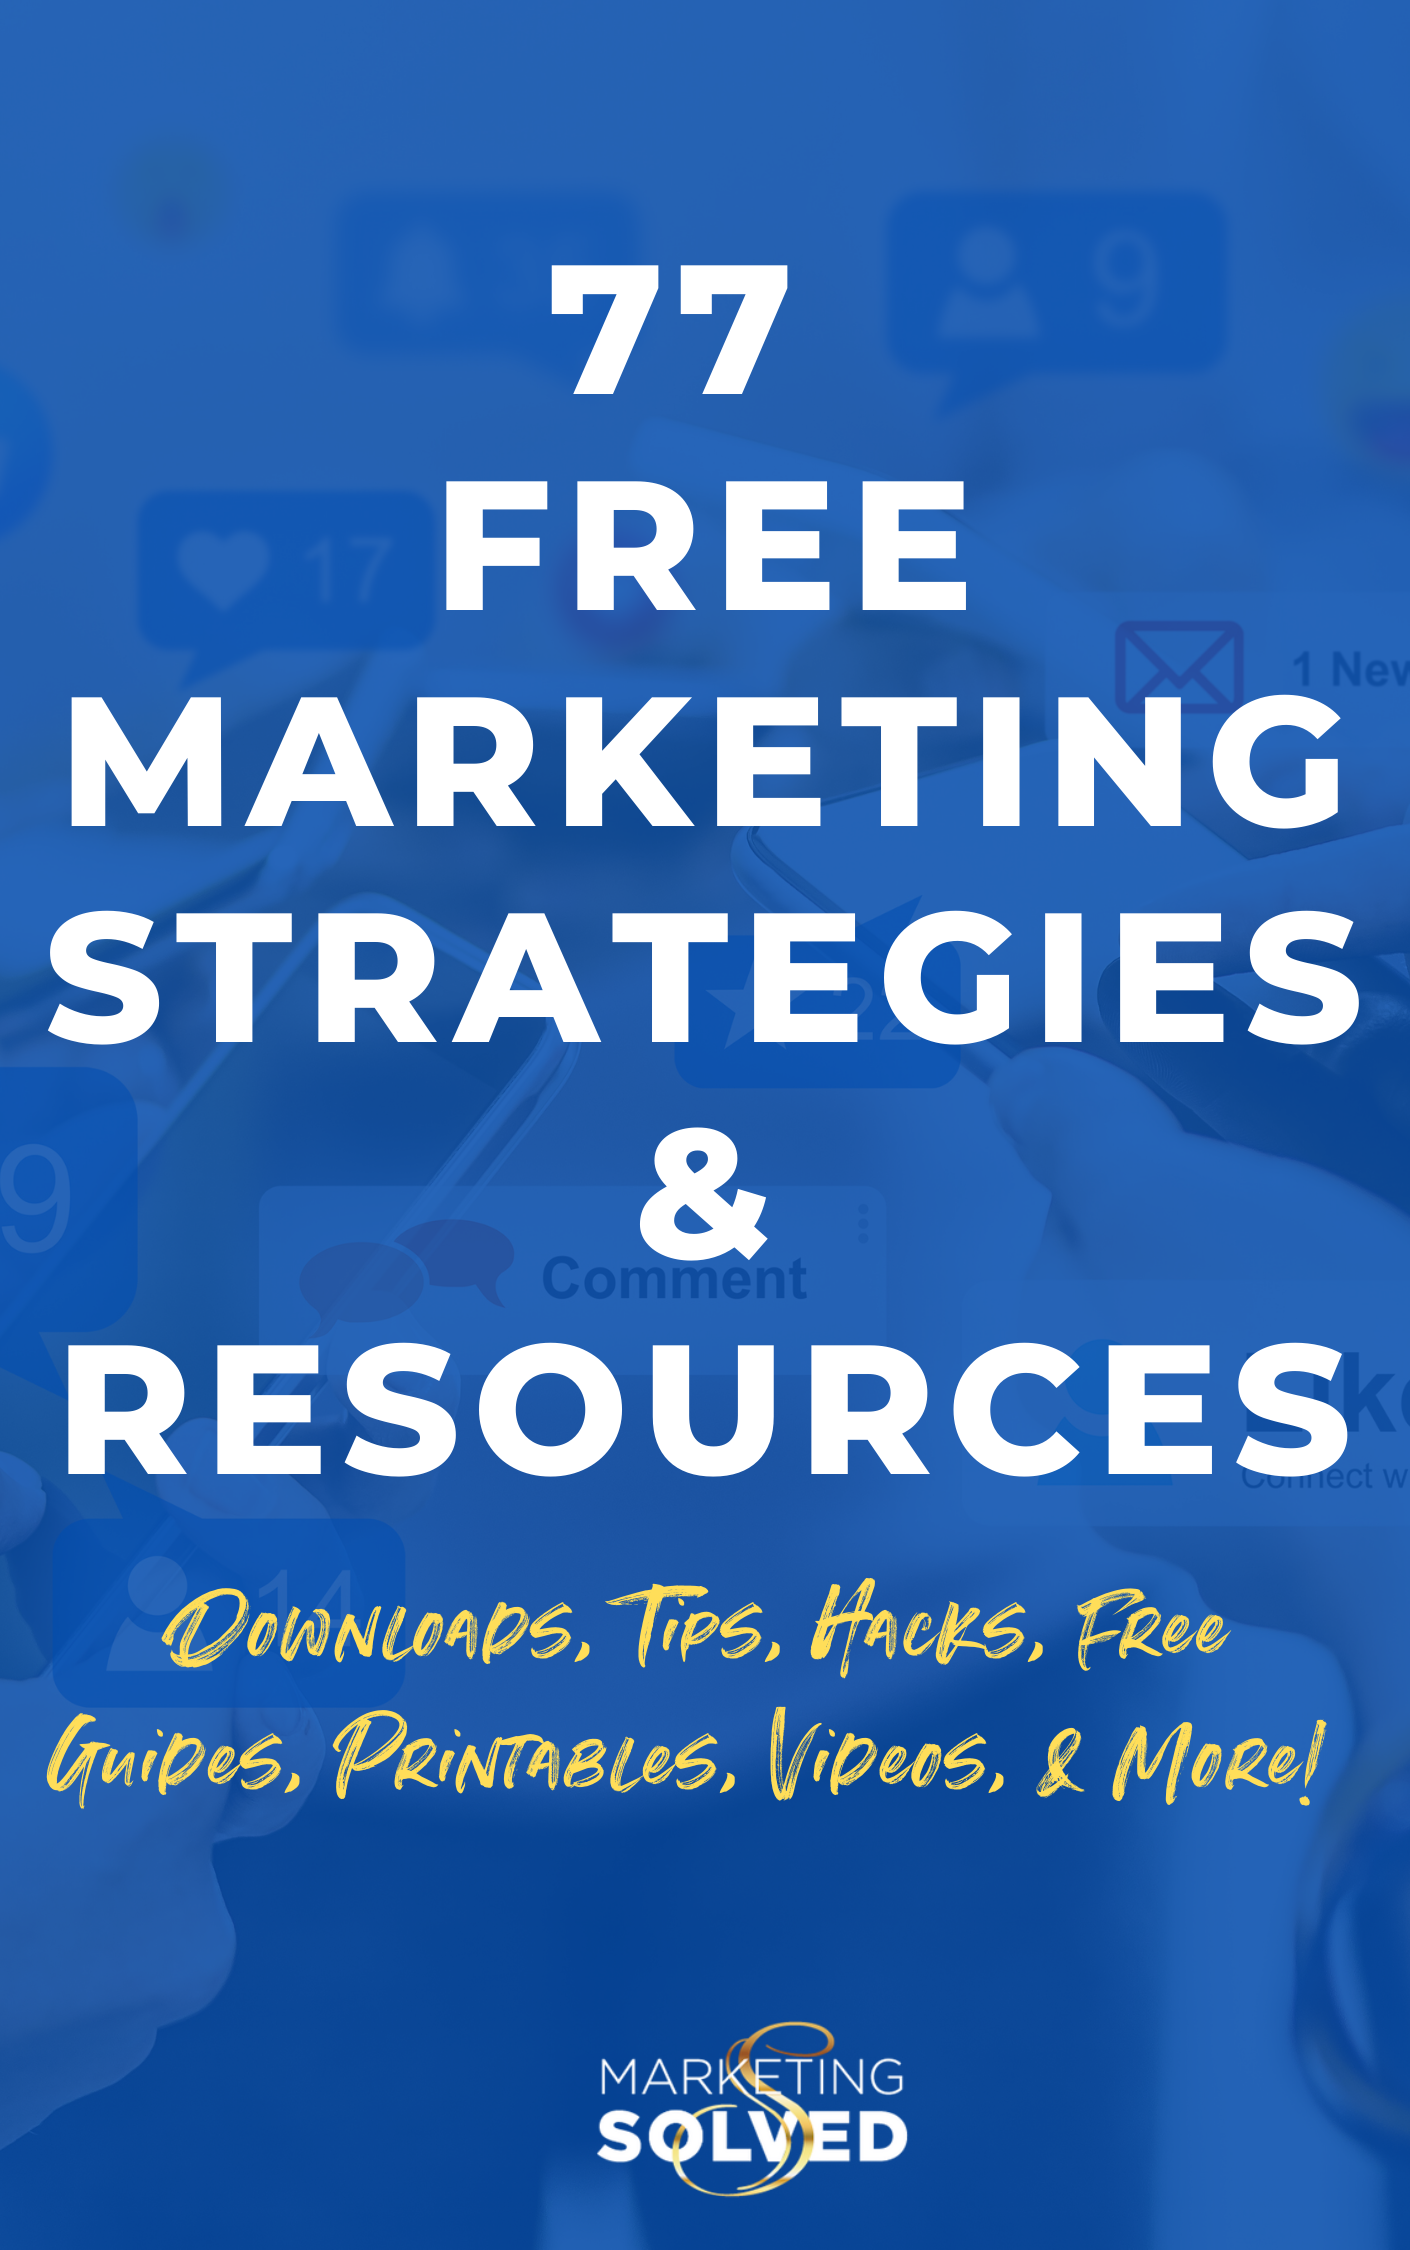 77 Small Business Marketing Strategies and Resource. Marketing Printables, Marketing Hacks, Marketing Checklists, Marketing Guides, Marketing Tutorials, Marketing Videos and more. #MarketingStrategies